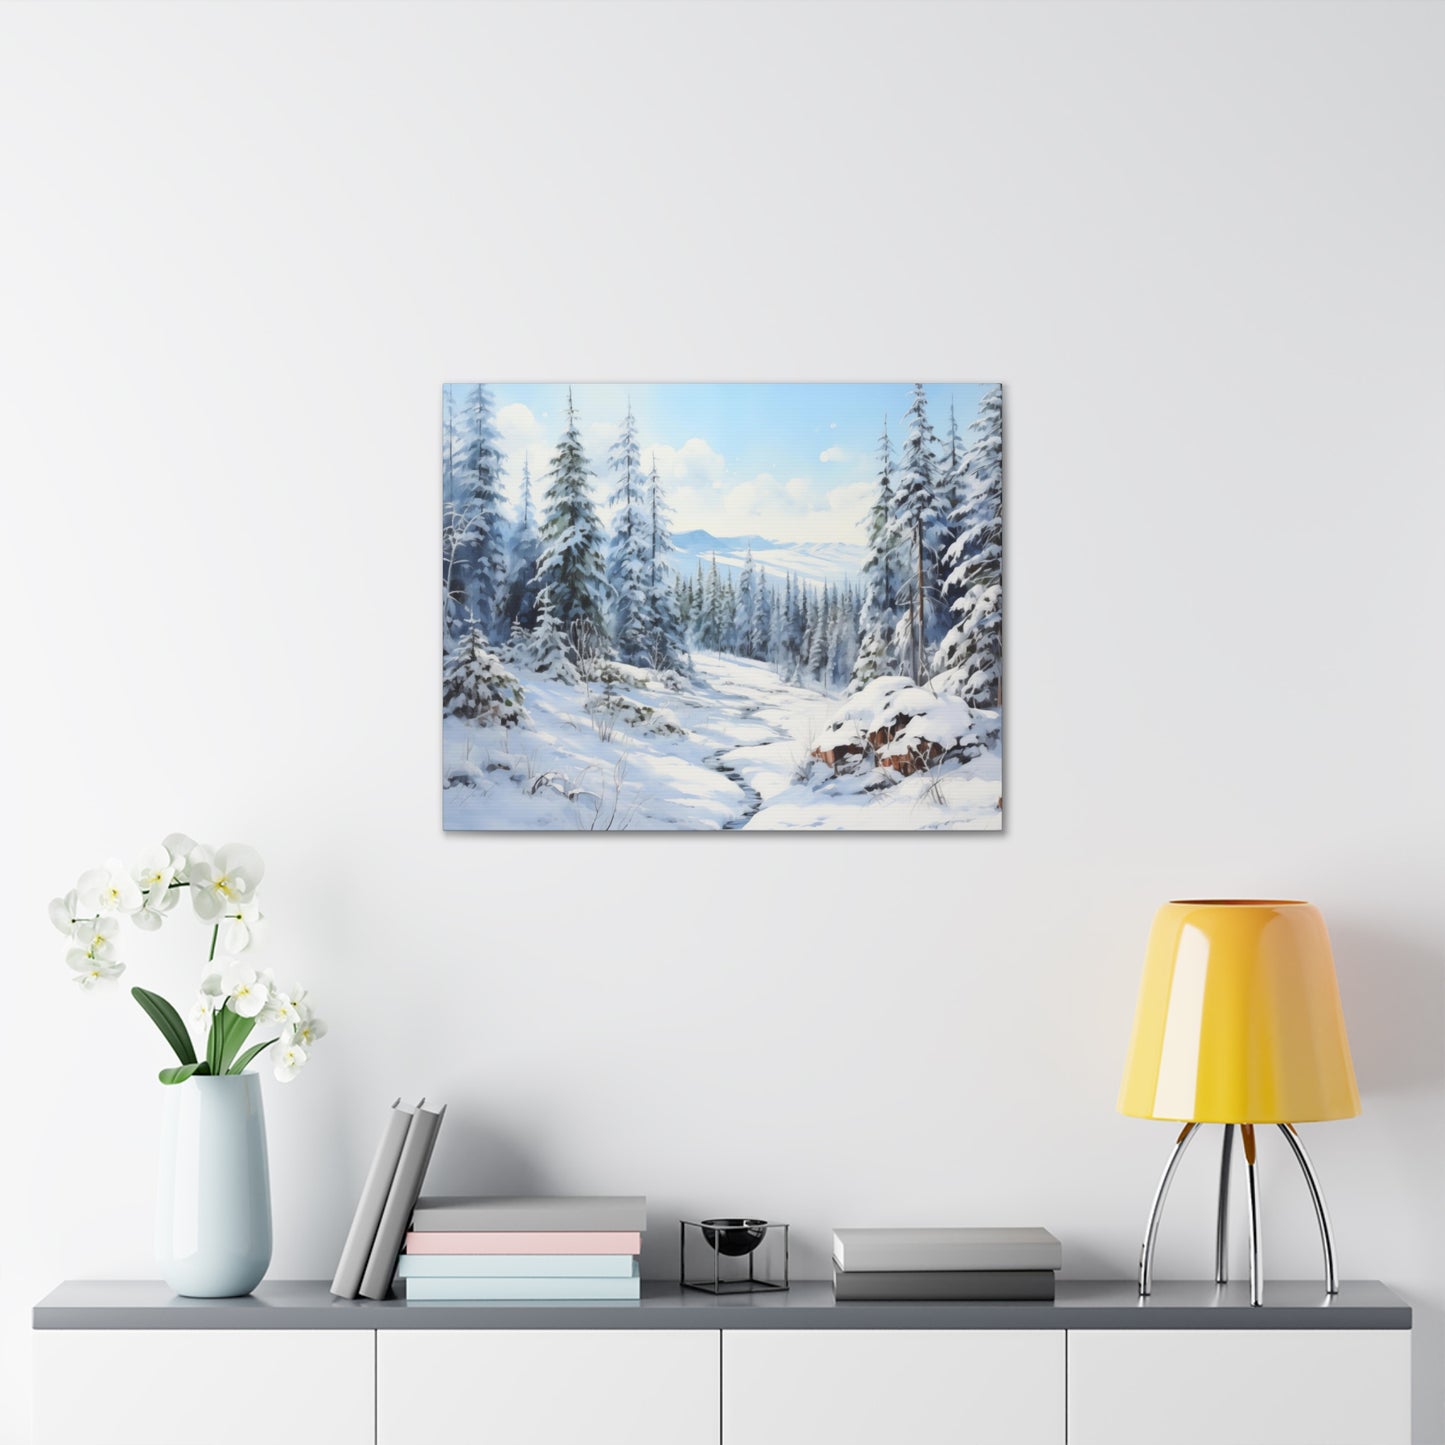 Winter Canvas Gallery Wrap, Snowy Forest Pine Trees Scene Watercolor Wall Art Print Decor Small Large Hanging Landscape Living Room Starcove Fashion